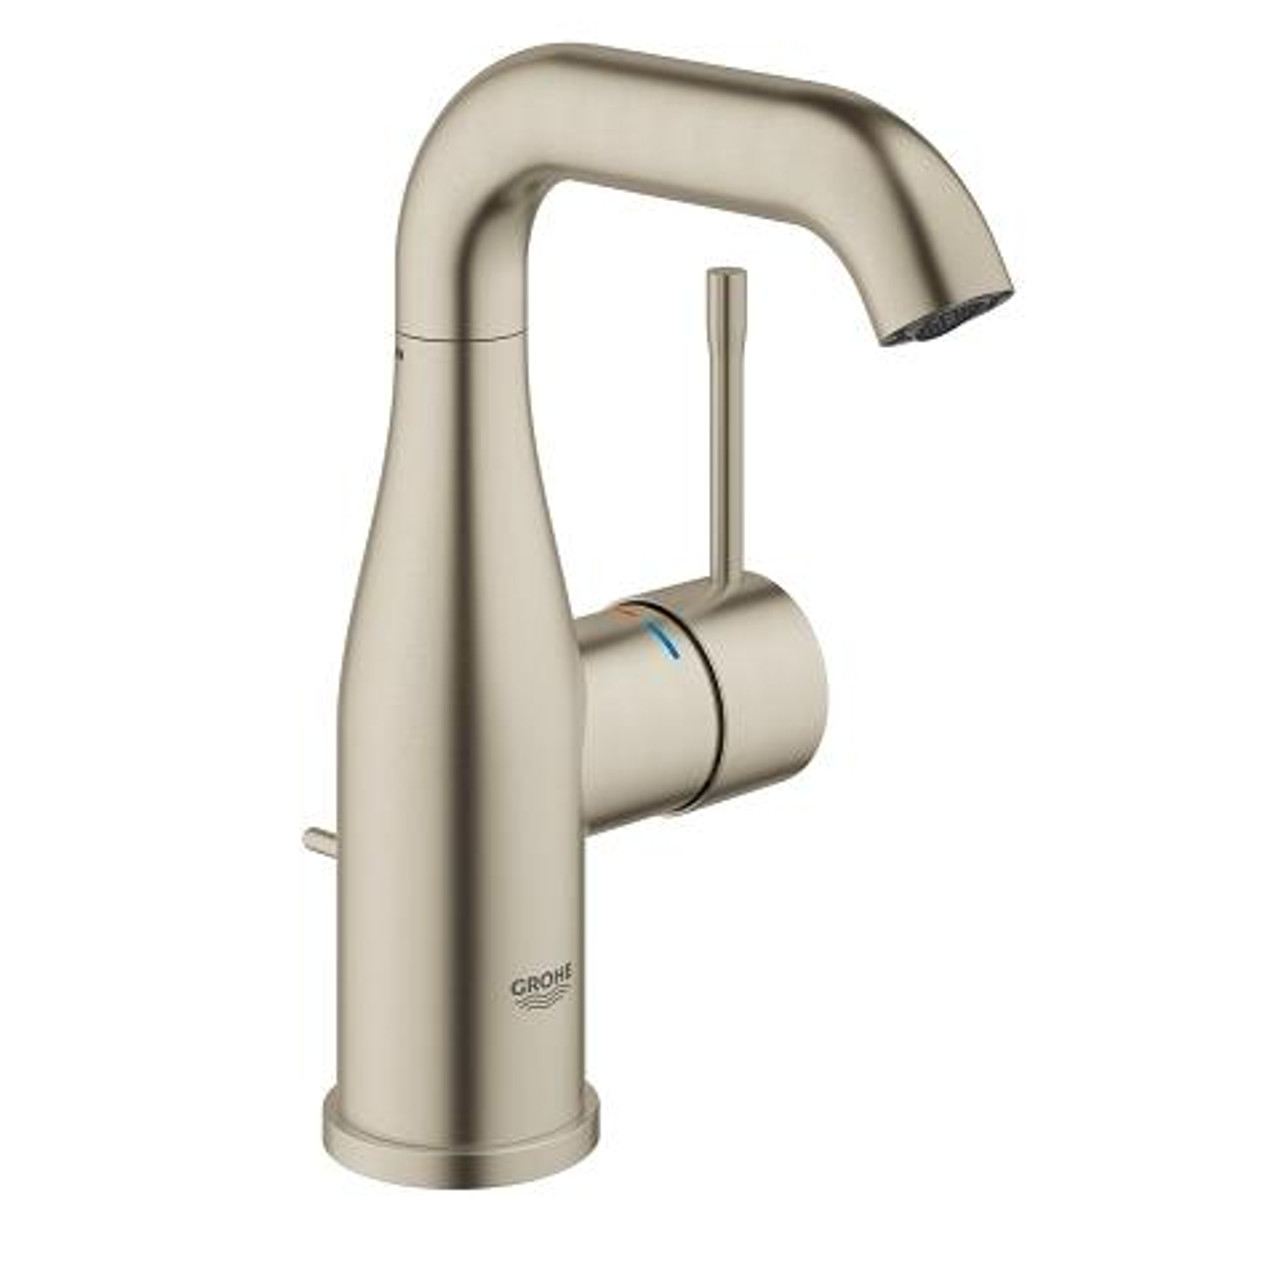 Grohe Essence Single Handle Bathroom Faucet M Size Brushed Nickel